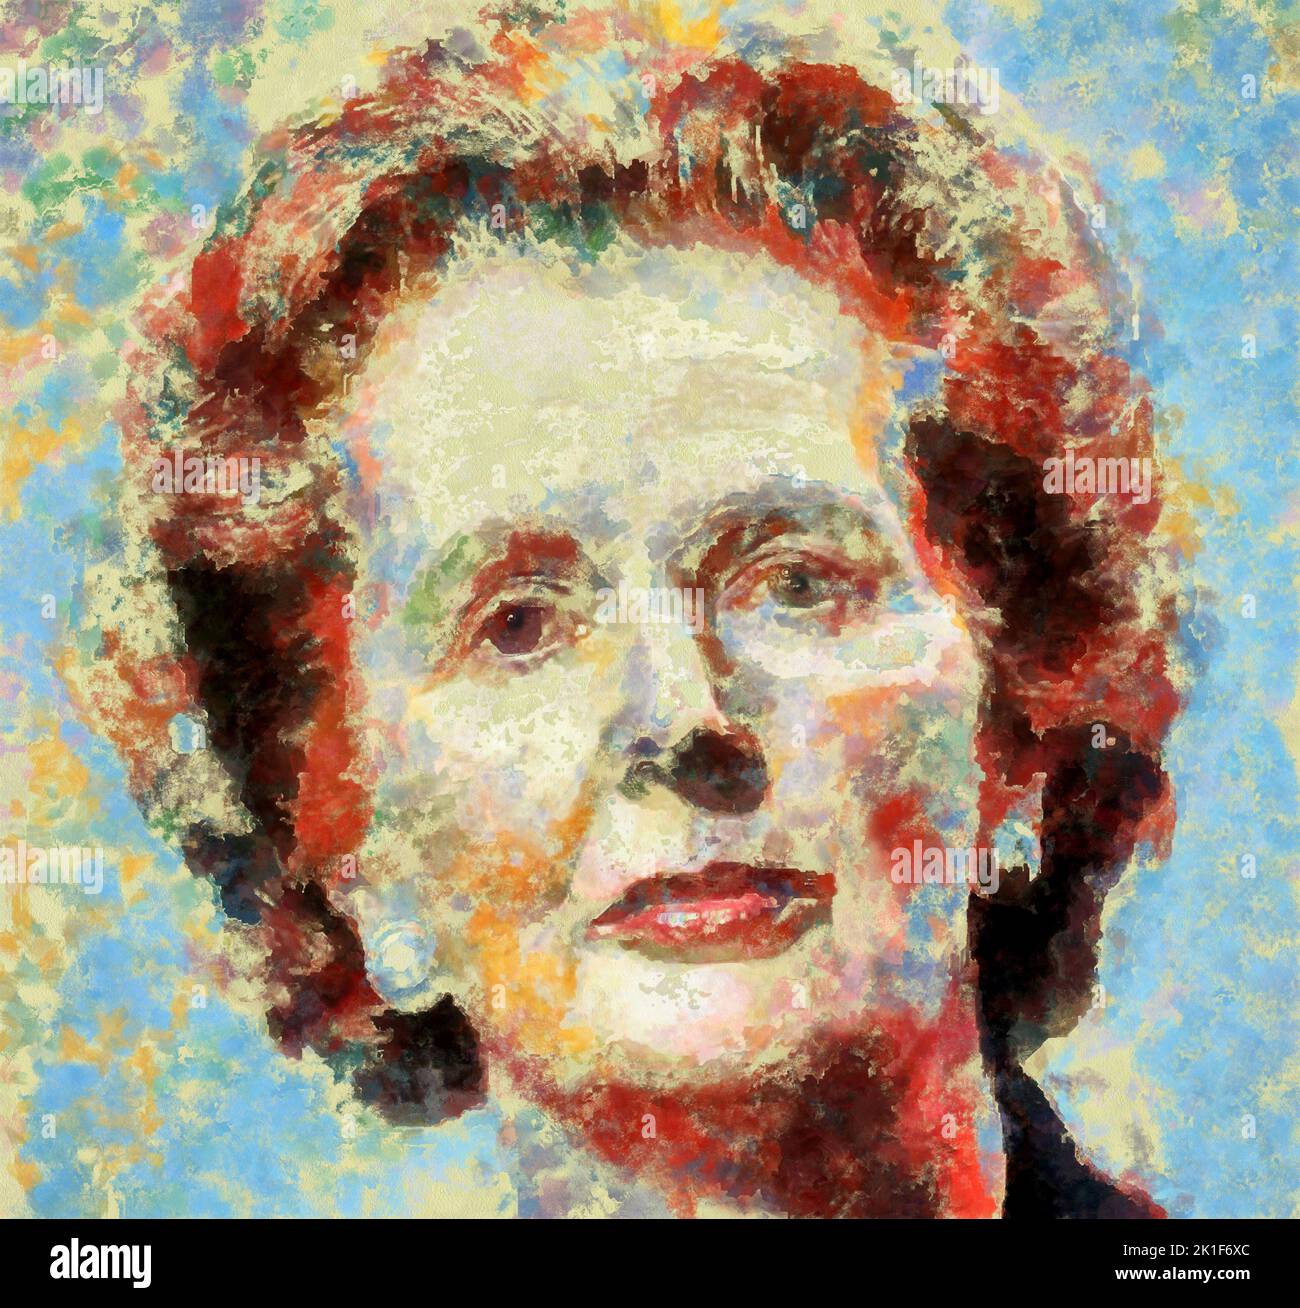 Painting portret Margaret Hilda Thatcher, Baroness Thatcher; Roberts, 1925 - 2013, British statesman, politician, Prime Minister of Great Britain, Stock Photo